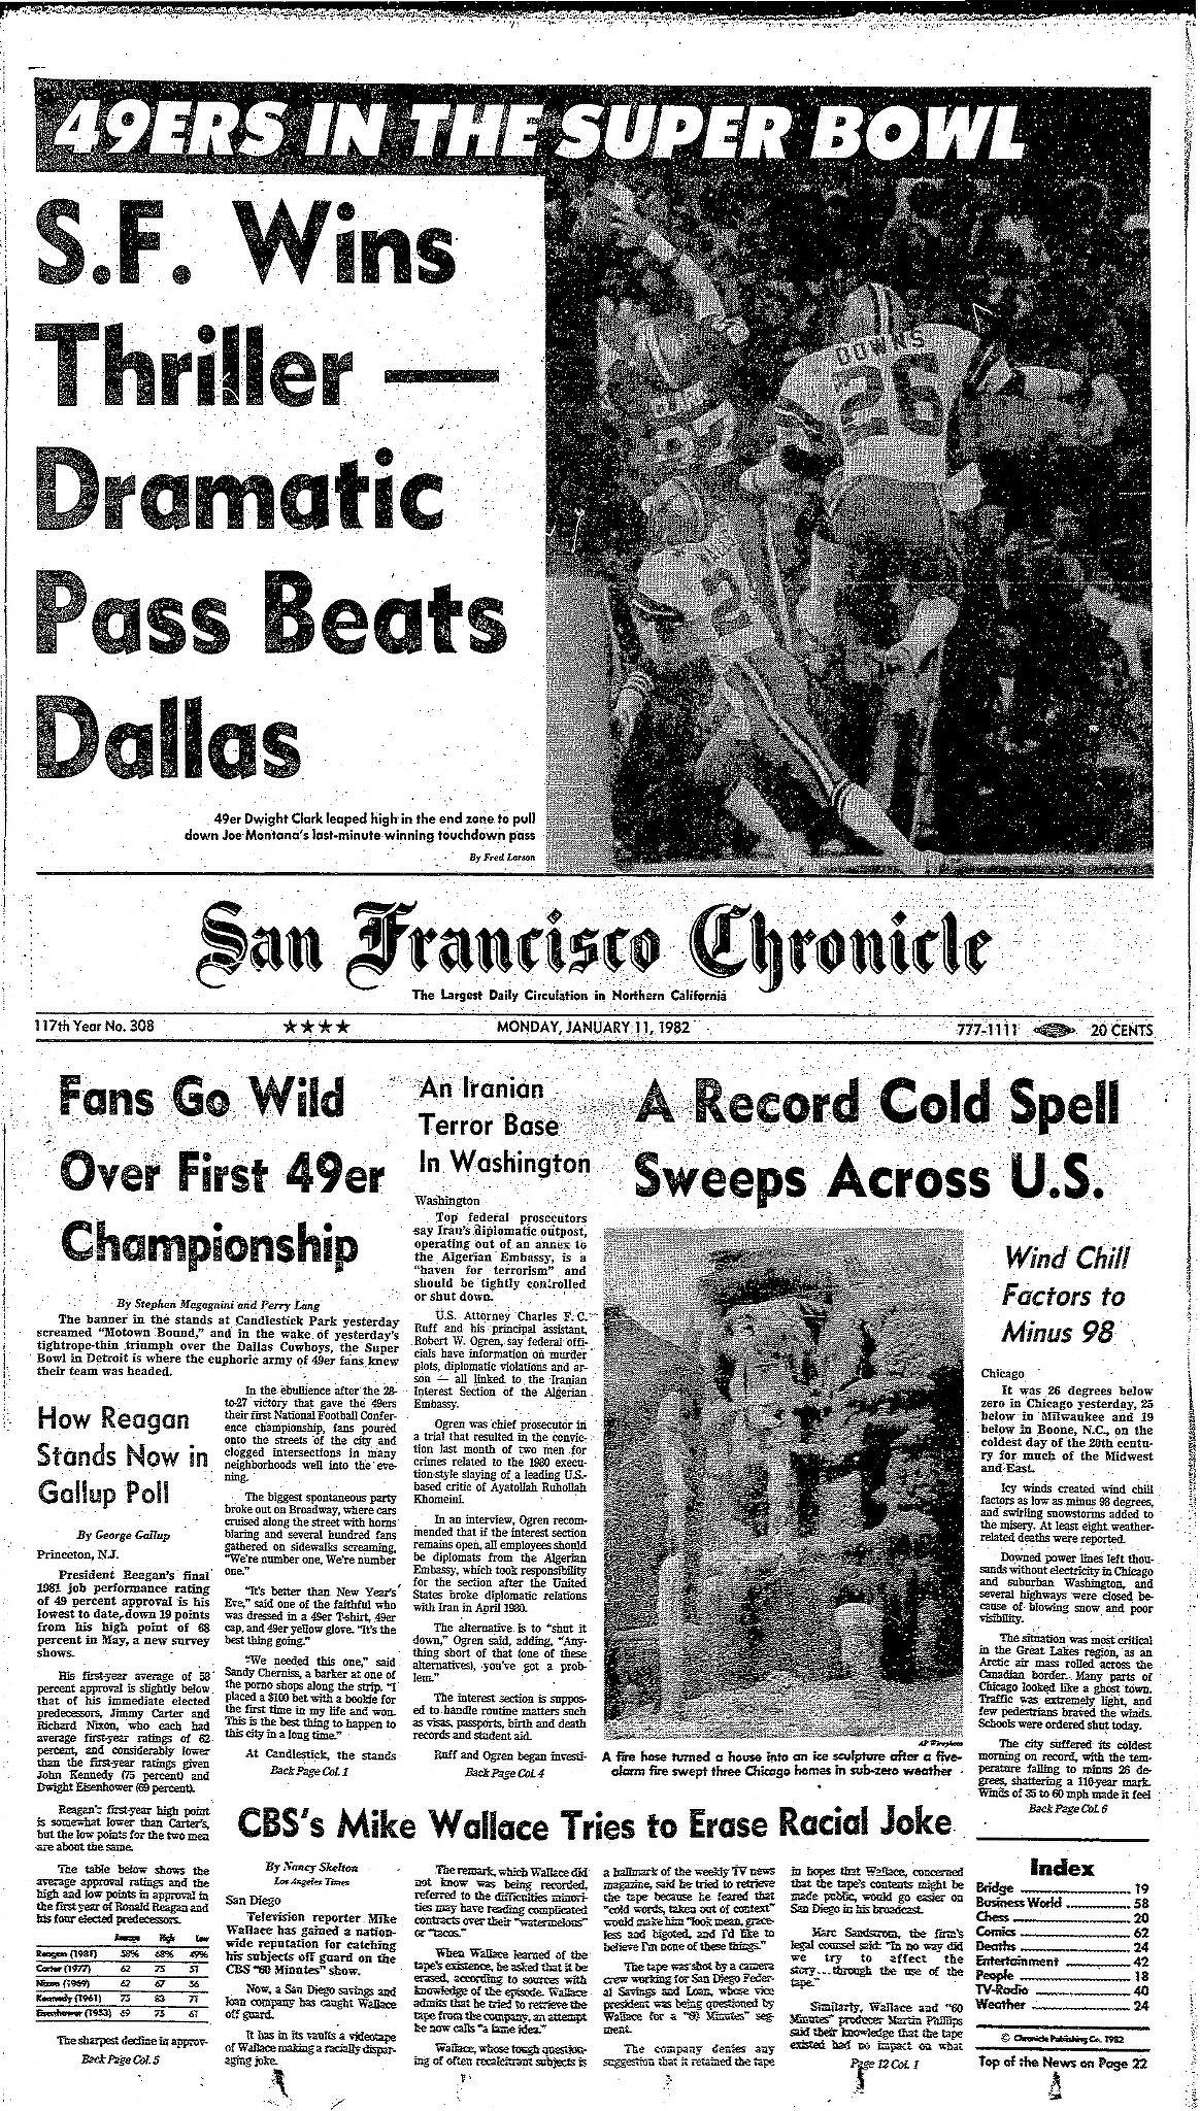 Historic Chronicle Front Pages January 11, 1981 The most famous play in San Francisco 49ers history, The Catch, propelled them into their first Super Bowl Chron365, Chroncover